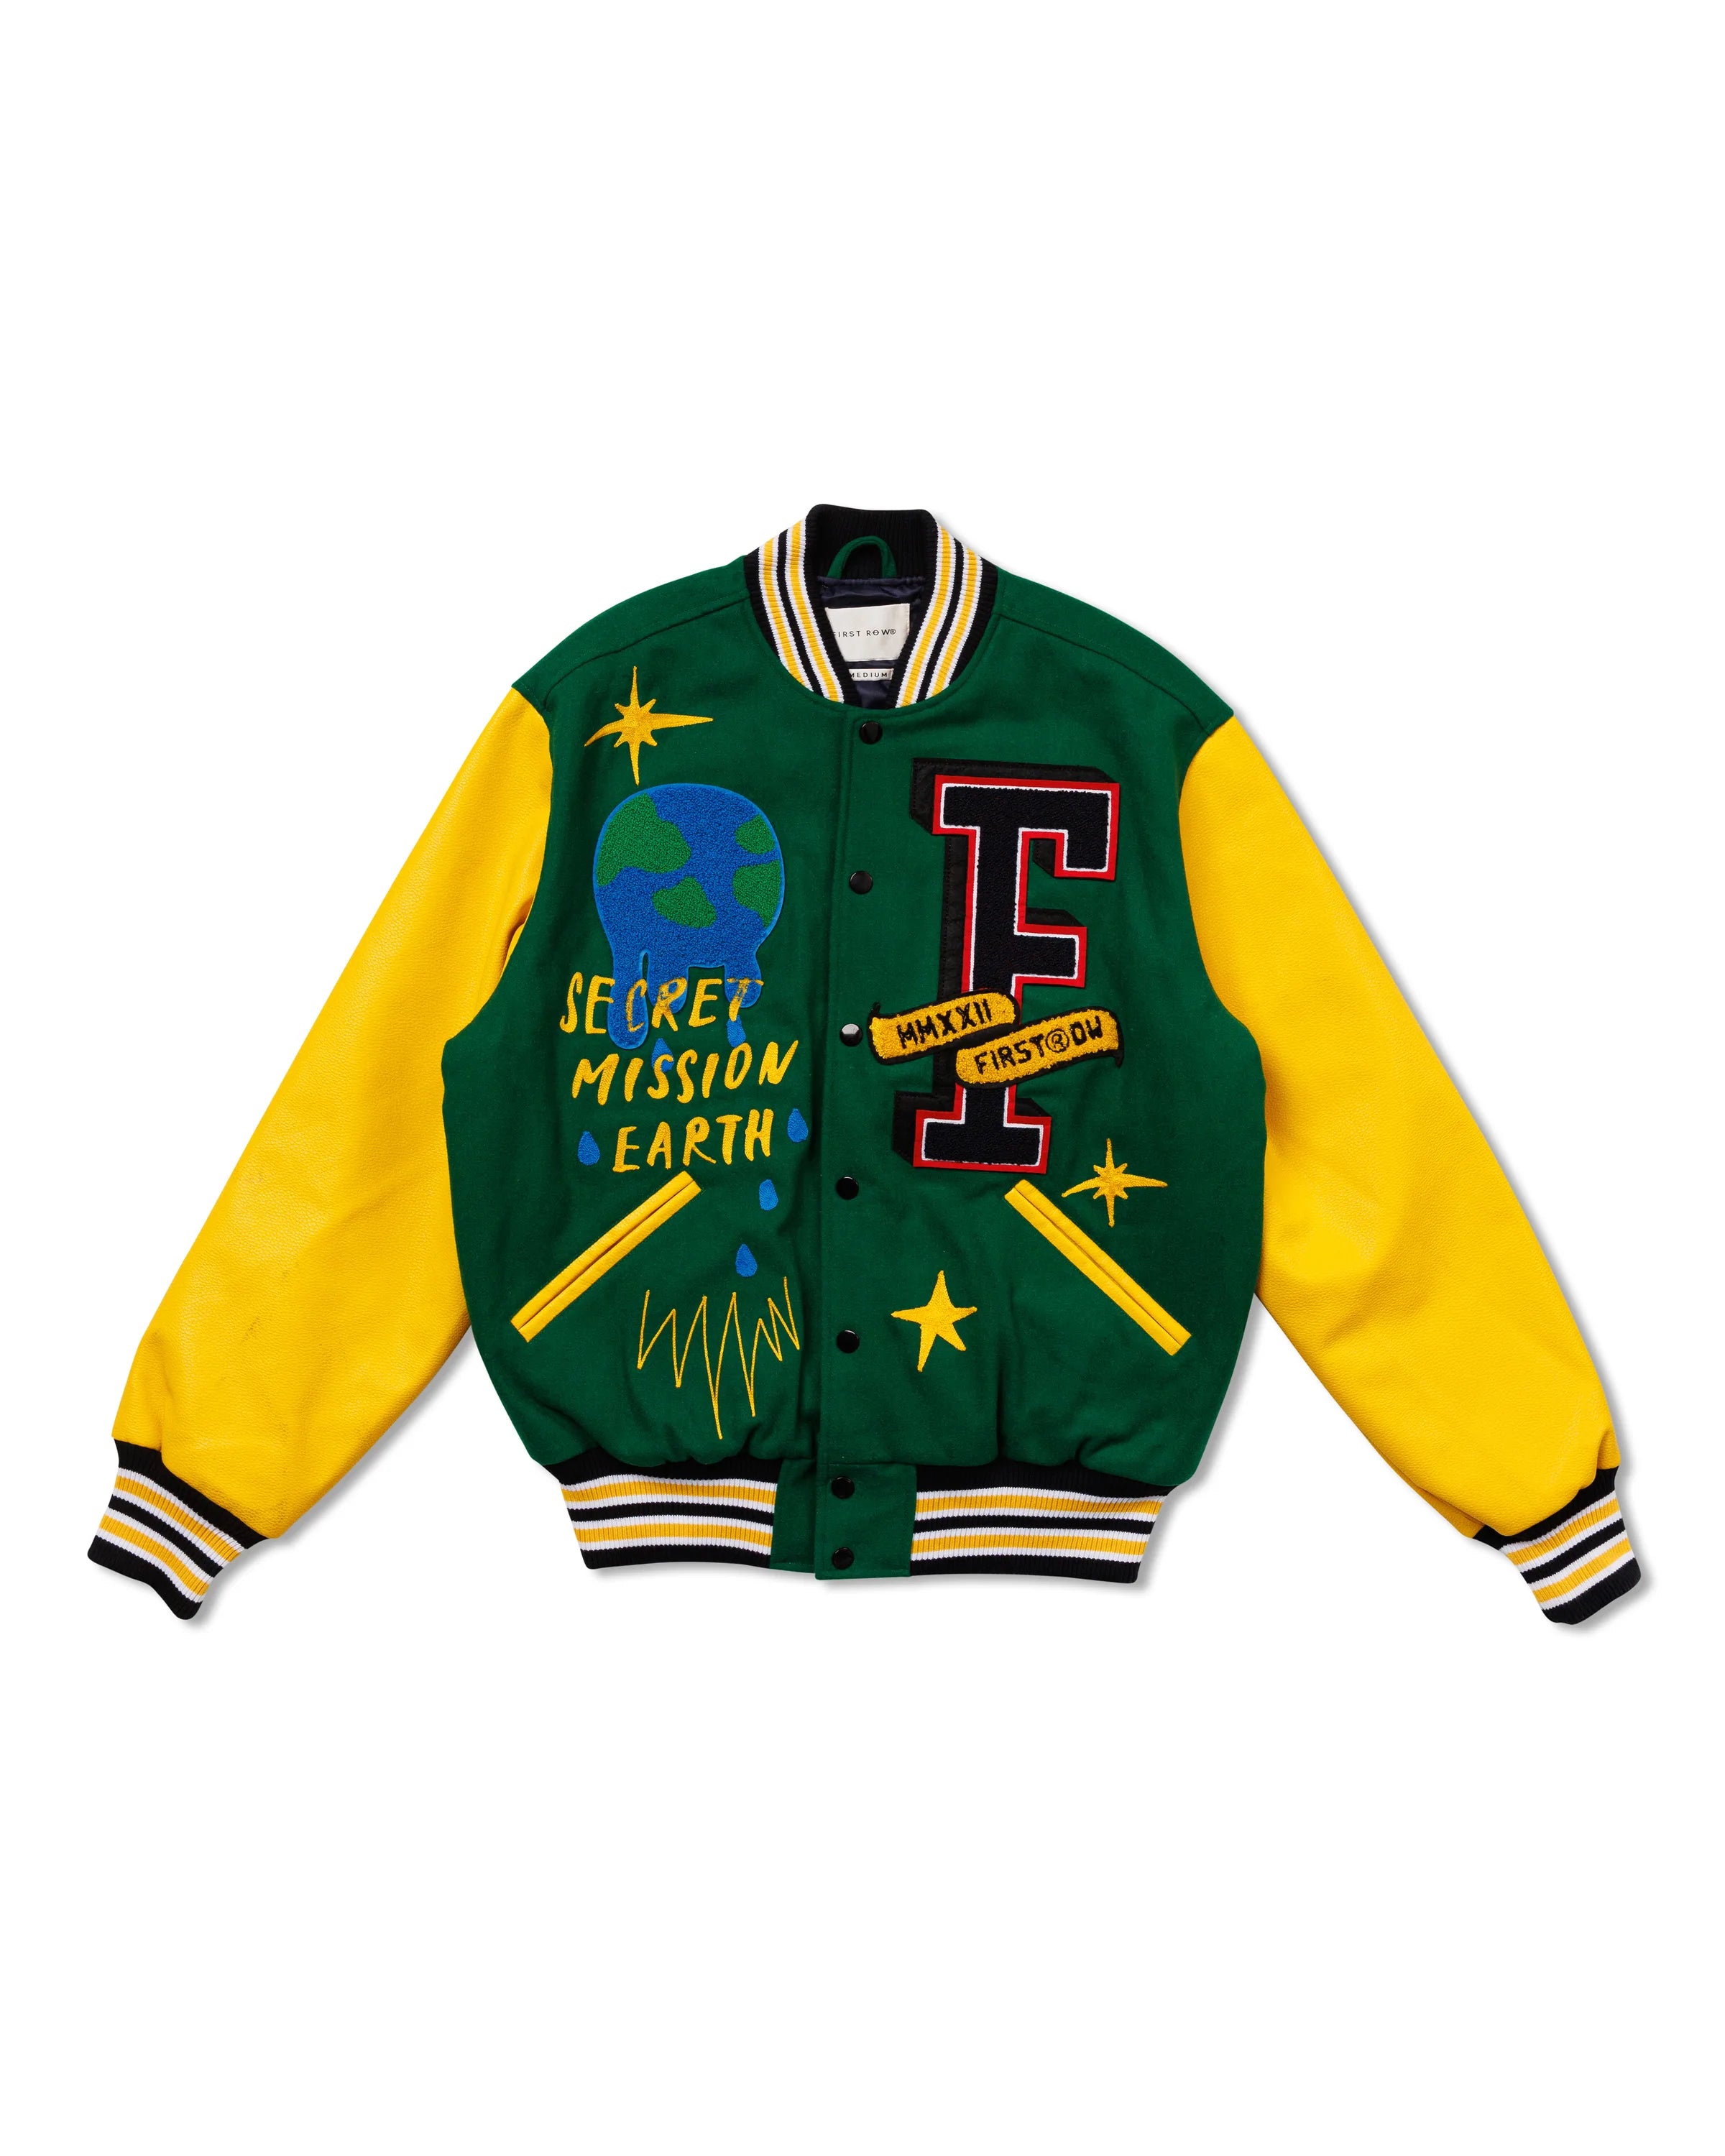 Re:Bound Clubhouse Varsity Jacket in Midfield Green - Glue Store